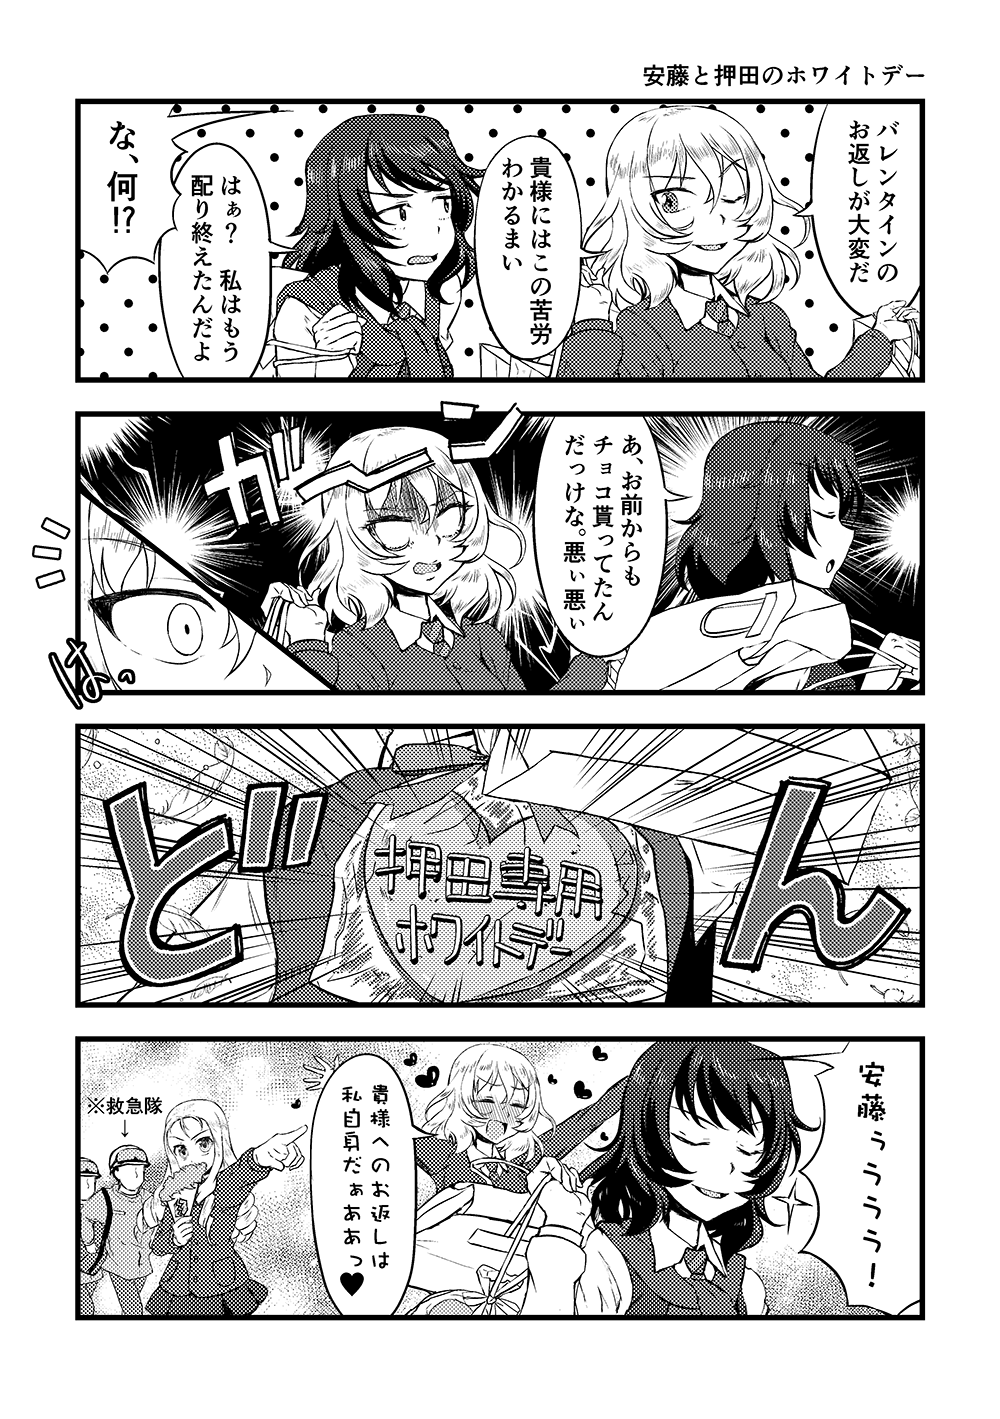 3girls andou_(girls_und_panzer) bangs bc_freedom_school_uniform blank_eyes blush closed_eyes closed_mouth comic commentary_request dress_shirt eyebrows_visible_through_hair floating_heart girls_und_panzer greyscale hair_ornament heart highres long_sleeves looking_at_another marie_(girls_und_panzer) medium_hair messy_hair monochrome multiple_girls one_eye_closed open_mouth oshida_(girls_und_panzer) pointing ranka_(yachou_no_kai) school_uniform shaded_face shirt short_hair speech_bubble standing sweater_around_neck vest wavy_hair